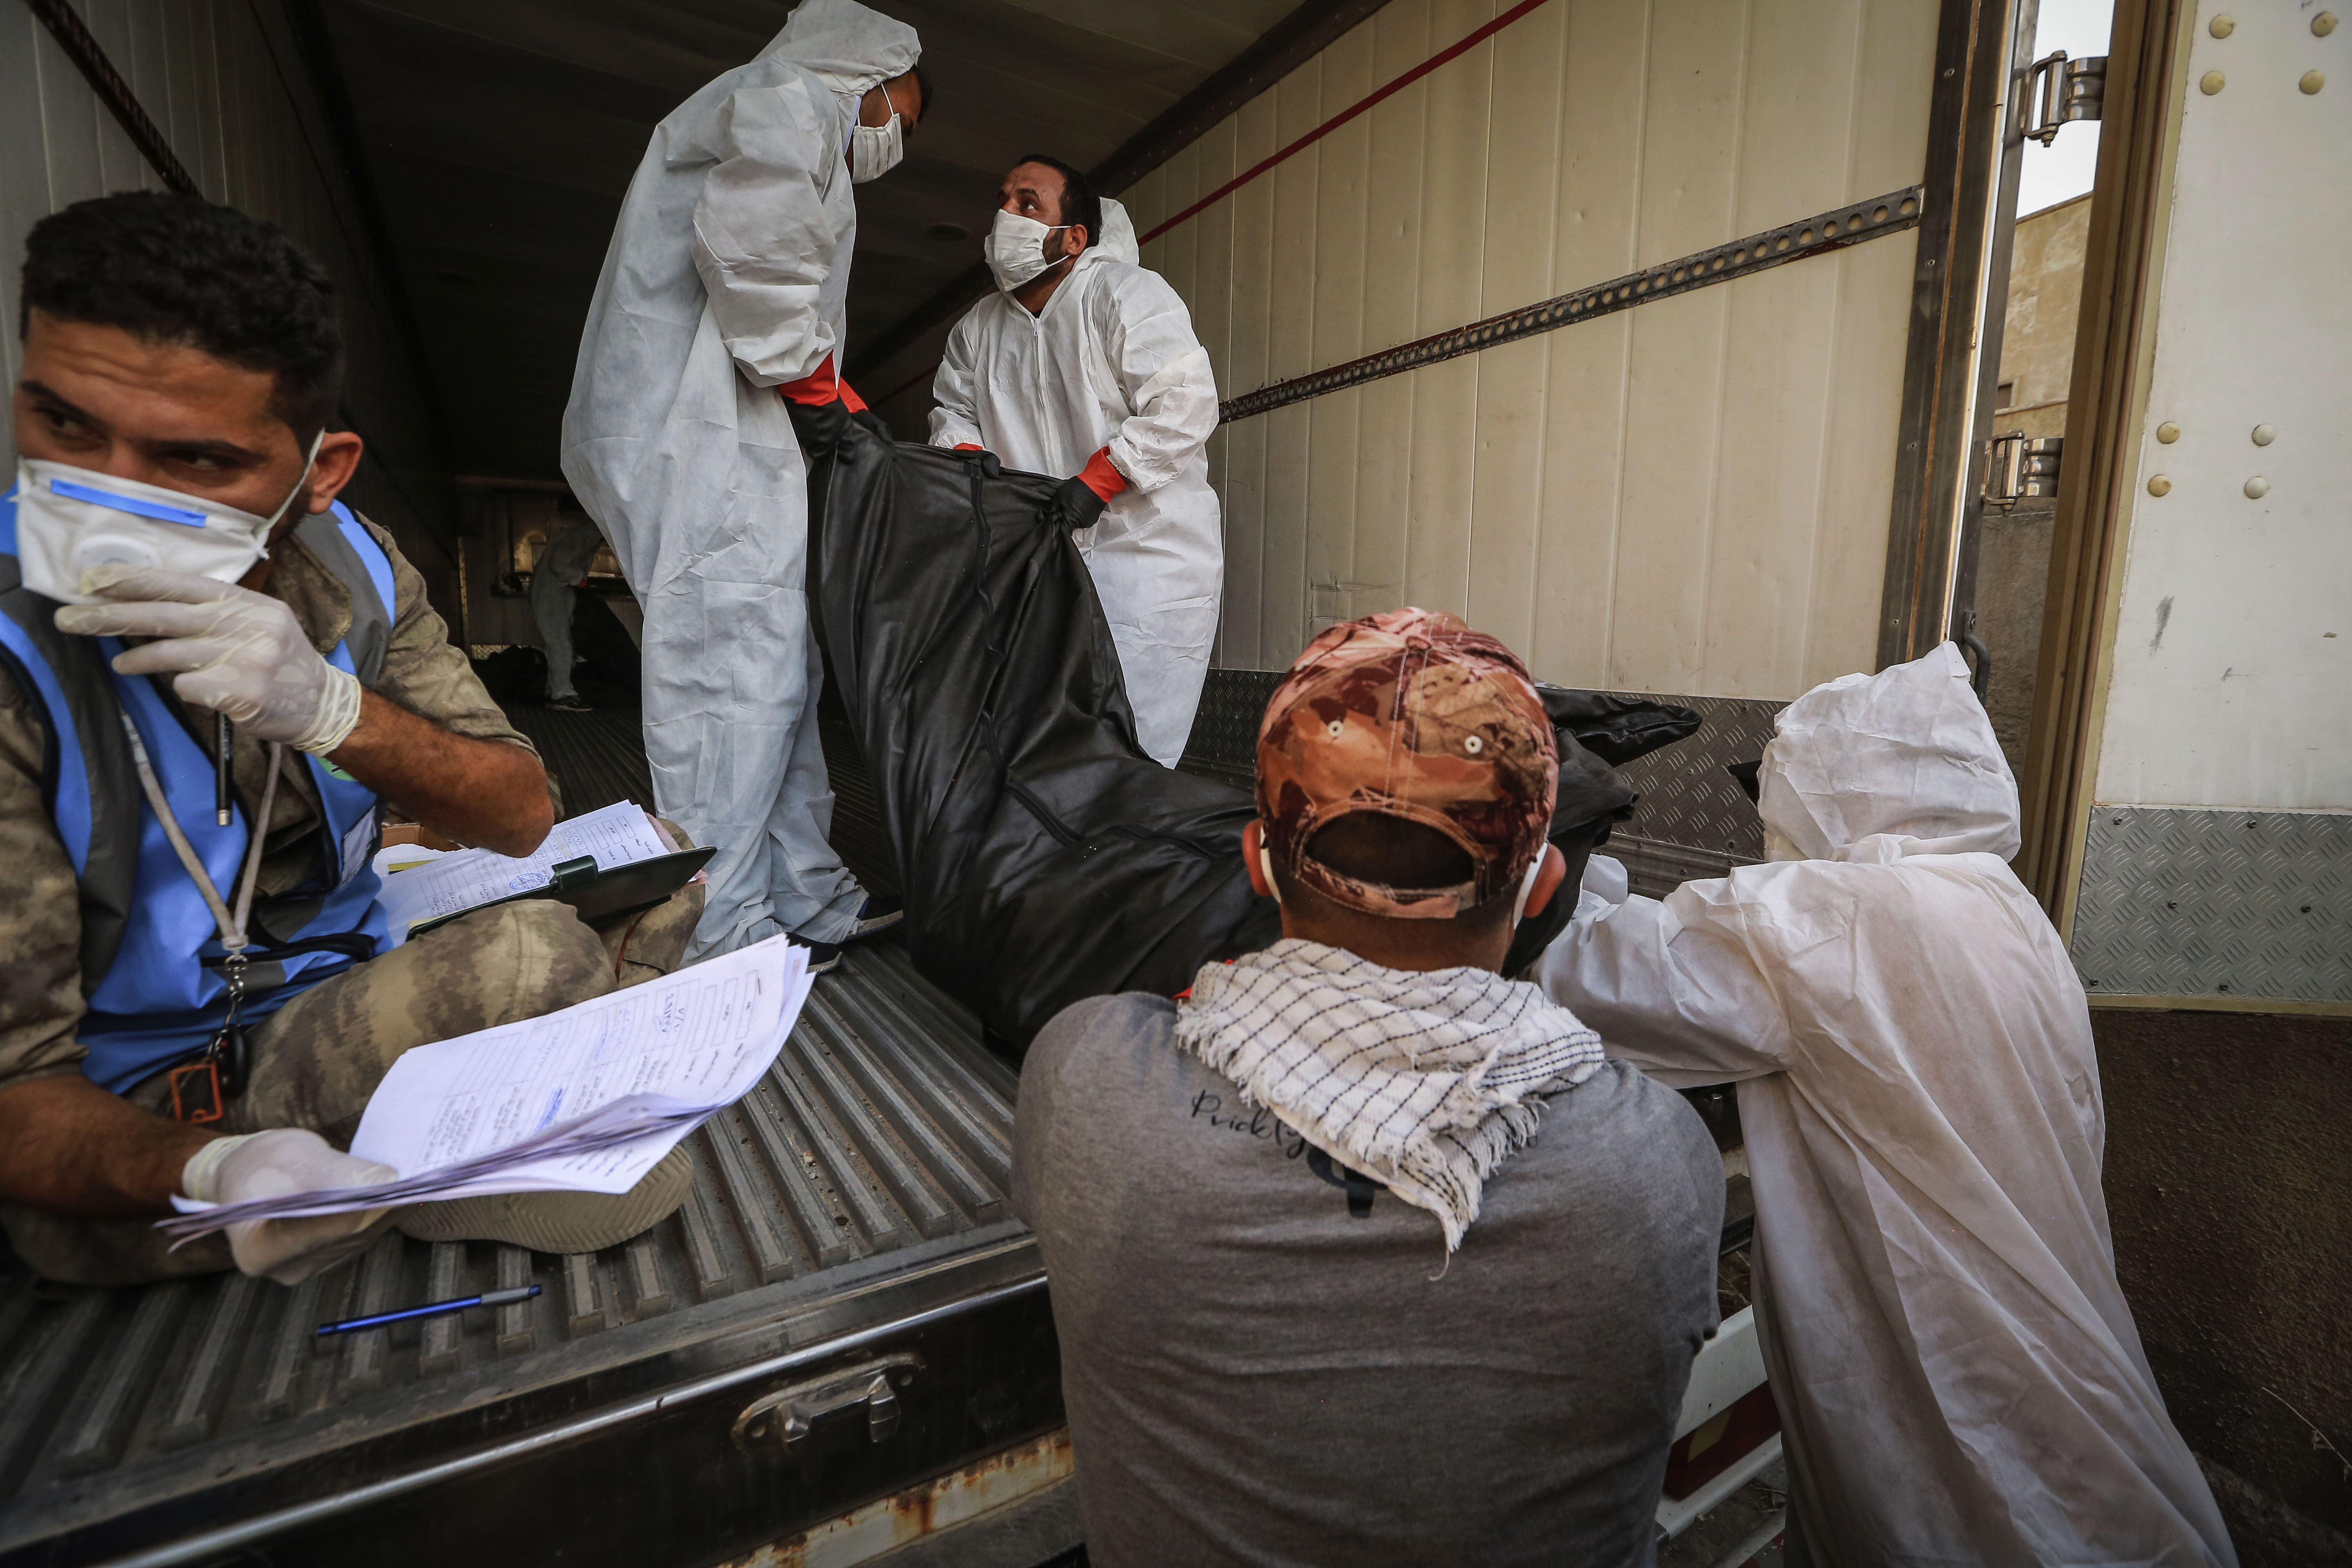 Workers in Baghdad, Iraq, put the body of a person said to have died from Covid-19 into a refrigerator truck to be transferred on July 11.